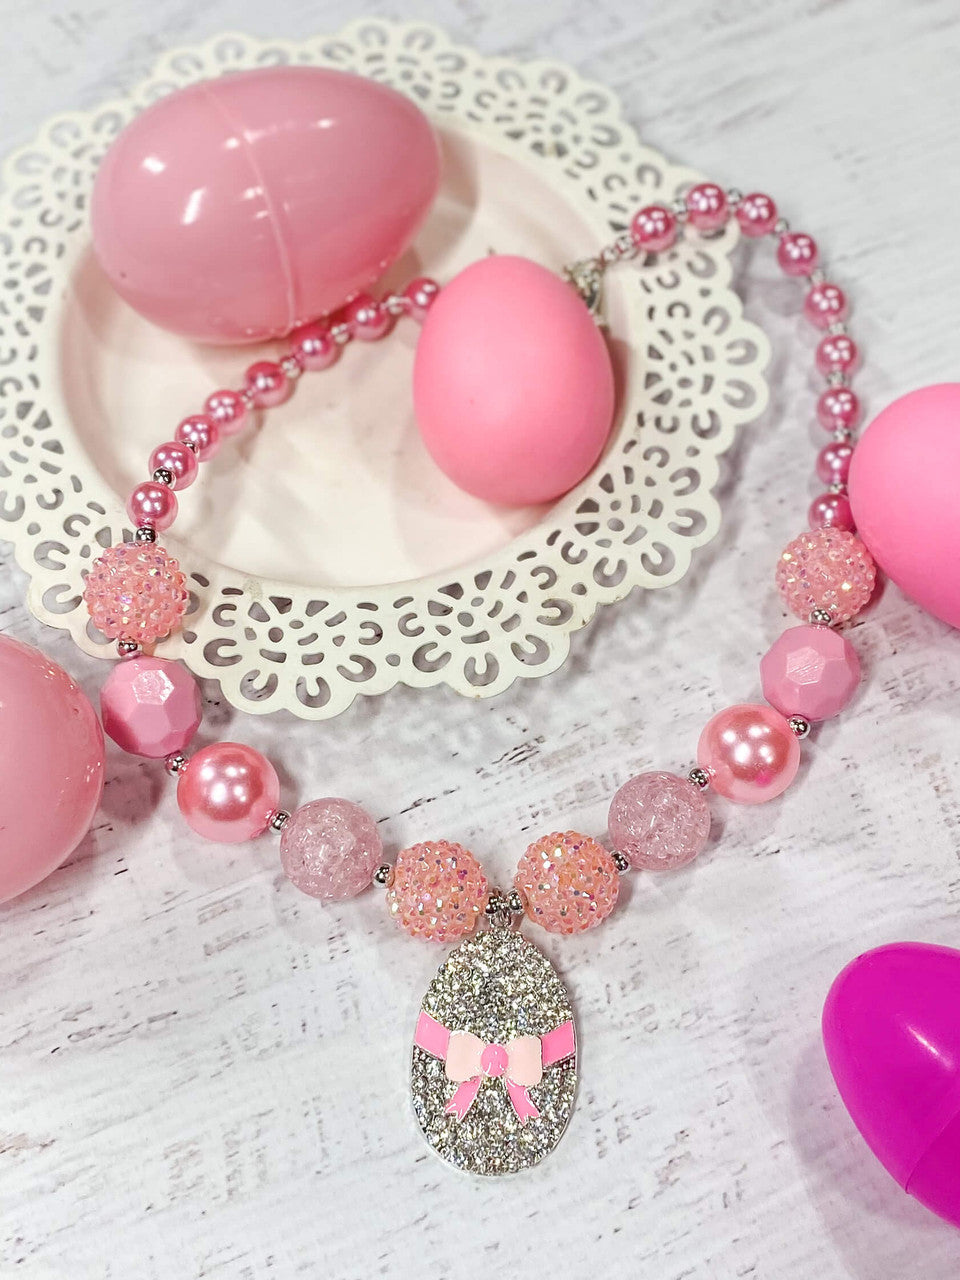 Silver rhinestone Easter egg with pink bow pendant chunky bead necklace with a mix of sparkly, pink pearl, and solid pink beads and a heart toggle closure.